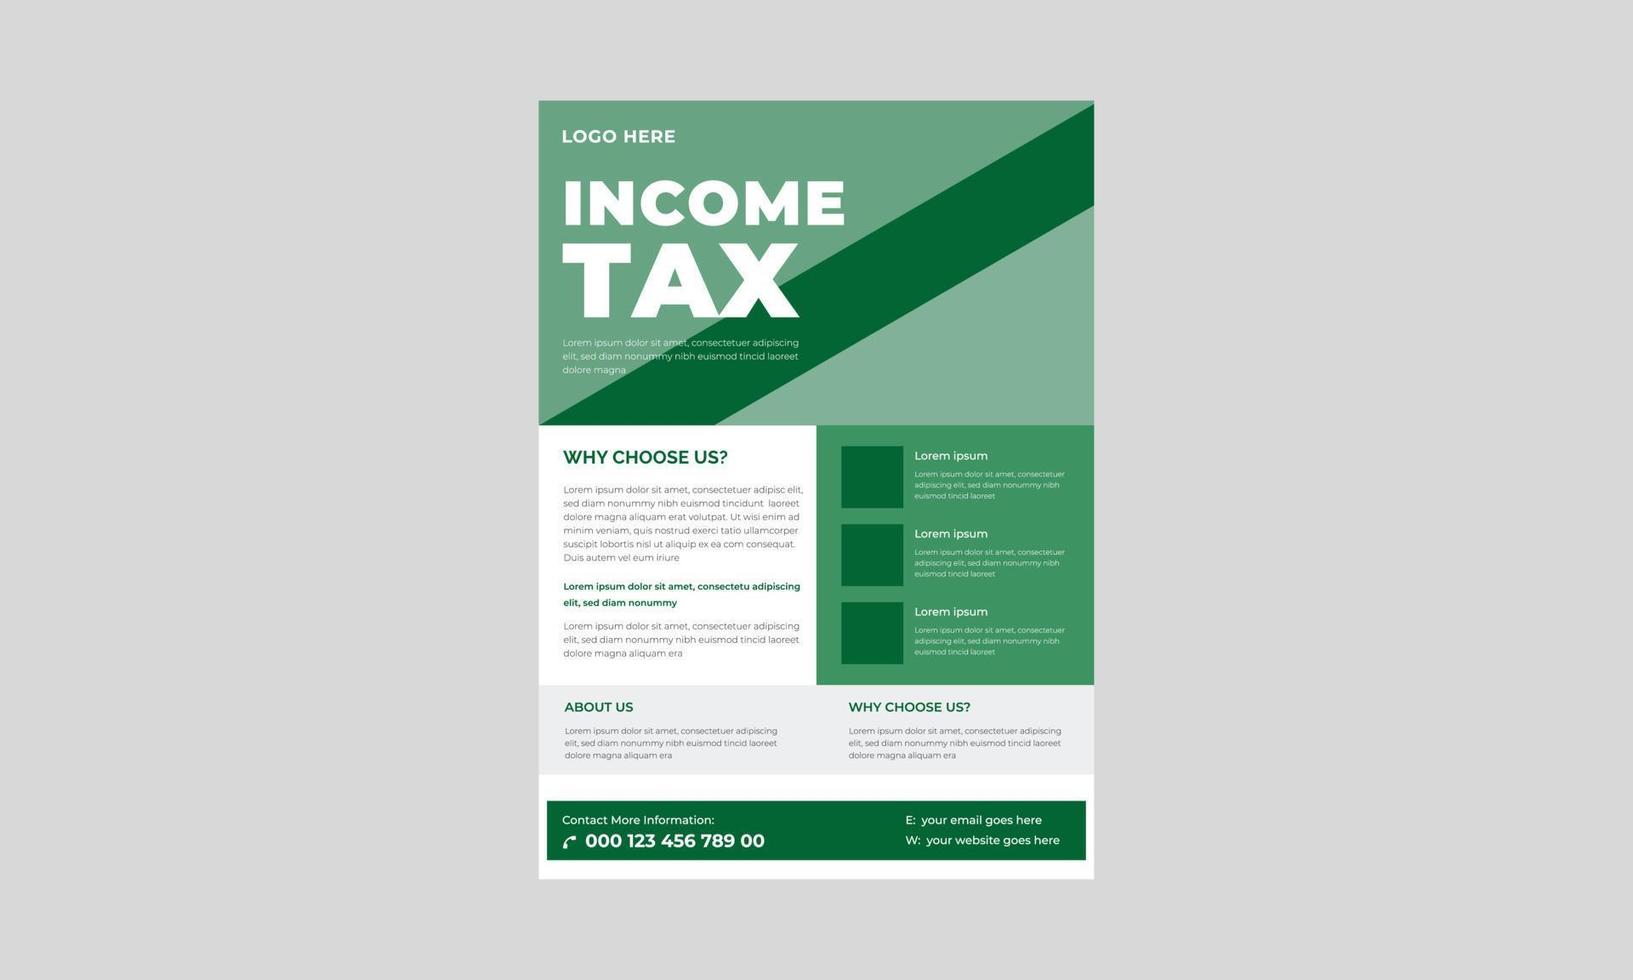 Income Tax Flyer, Investment Flyer Template, Tax Payment Concept Flyer Template Desgn, Income Tax Flyer, Poster, Banner. vector